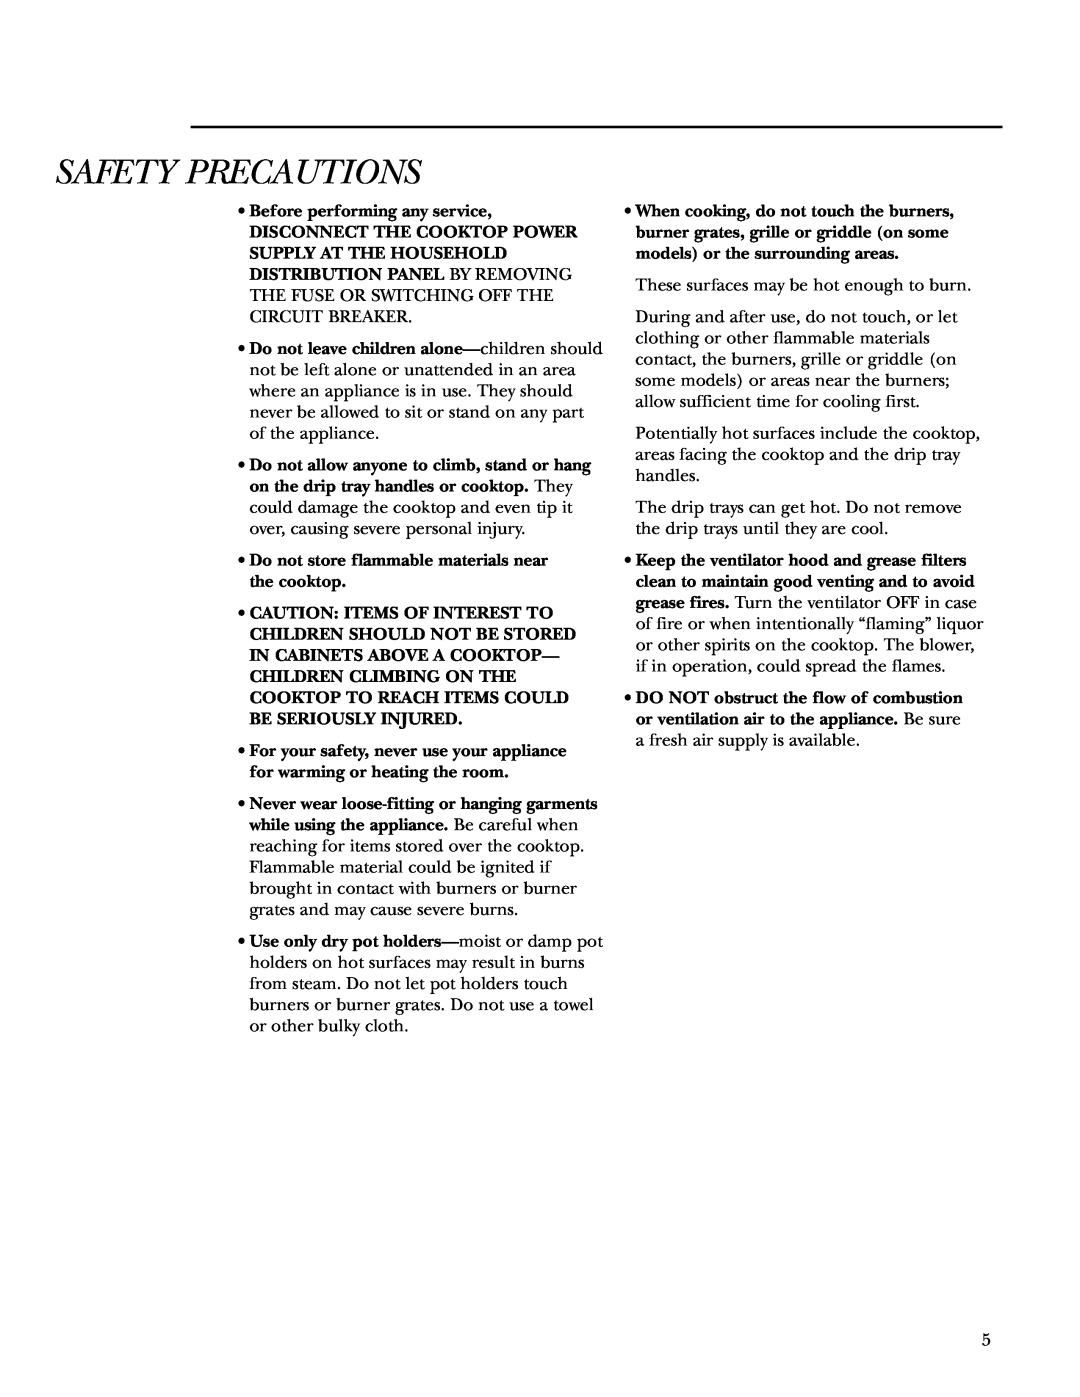 GE 36 owner manual Safety Precautions, Before performing any service 